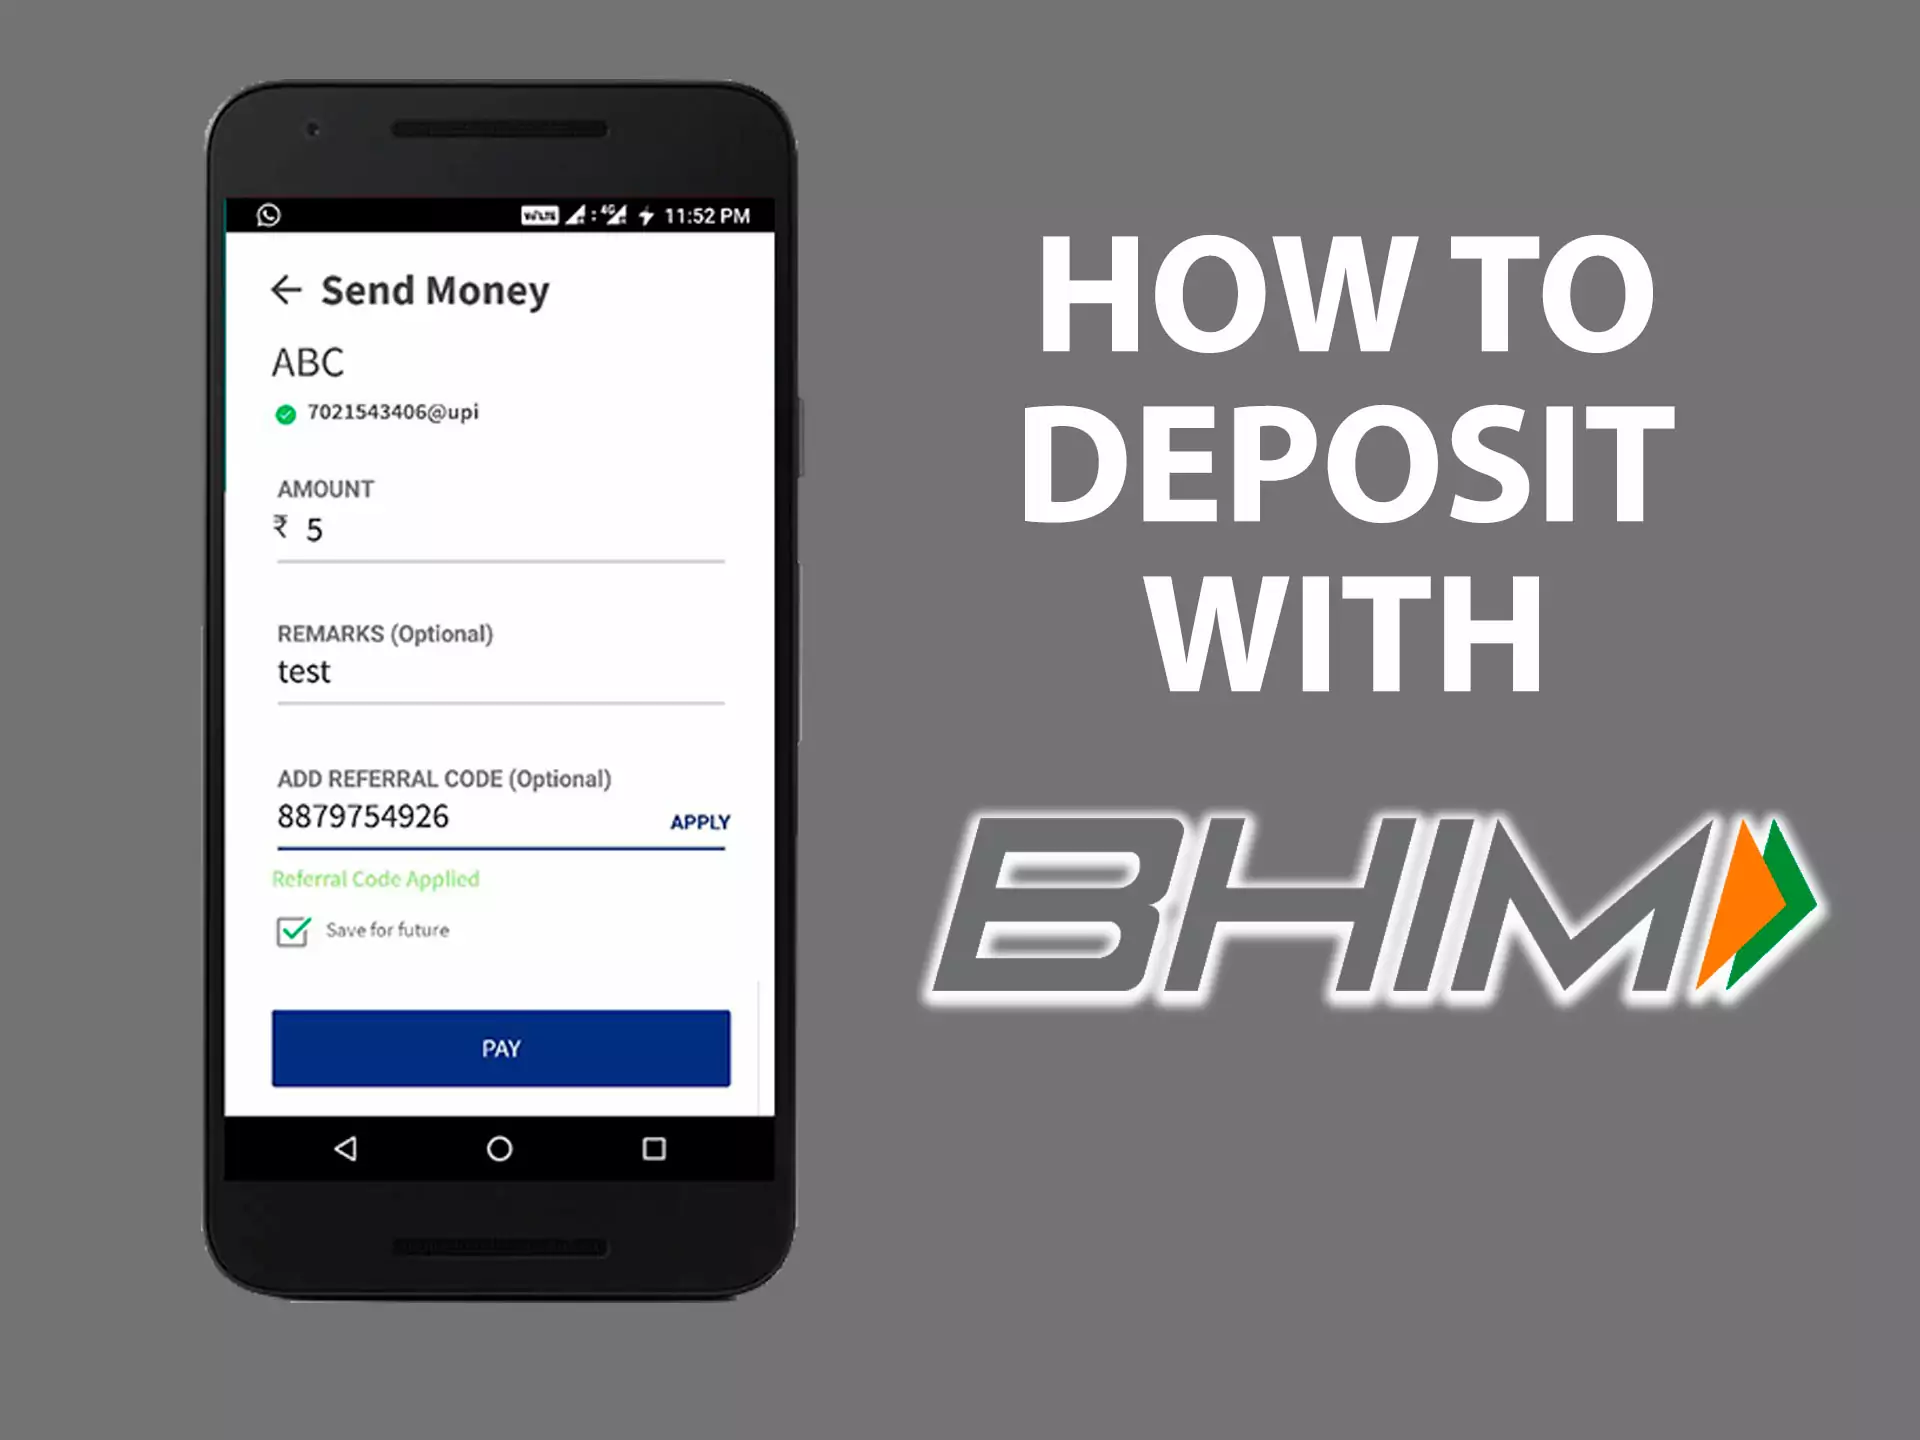 Deposit your rupees into a betting site using BHIM.